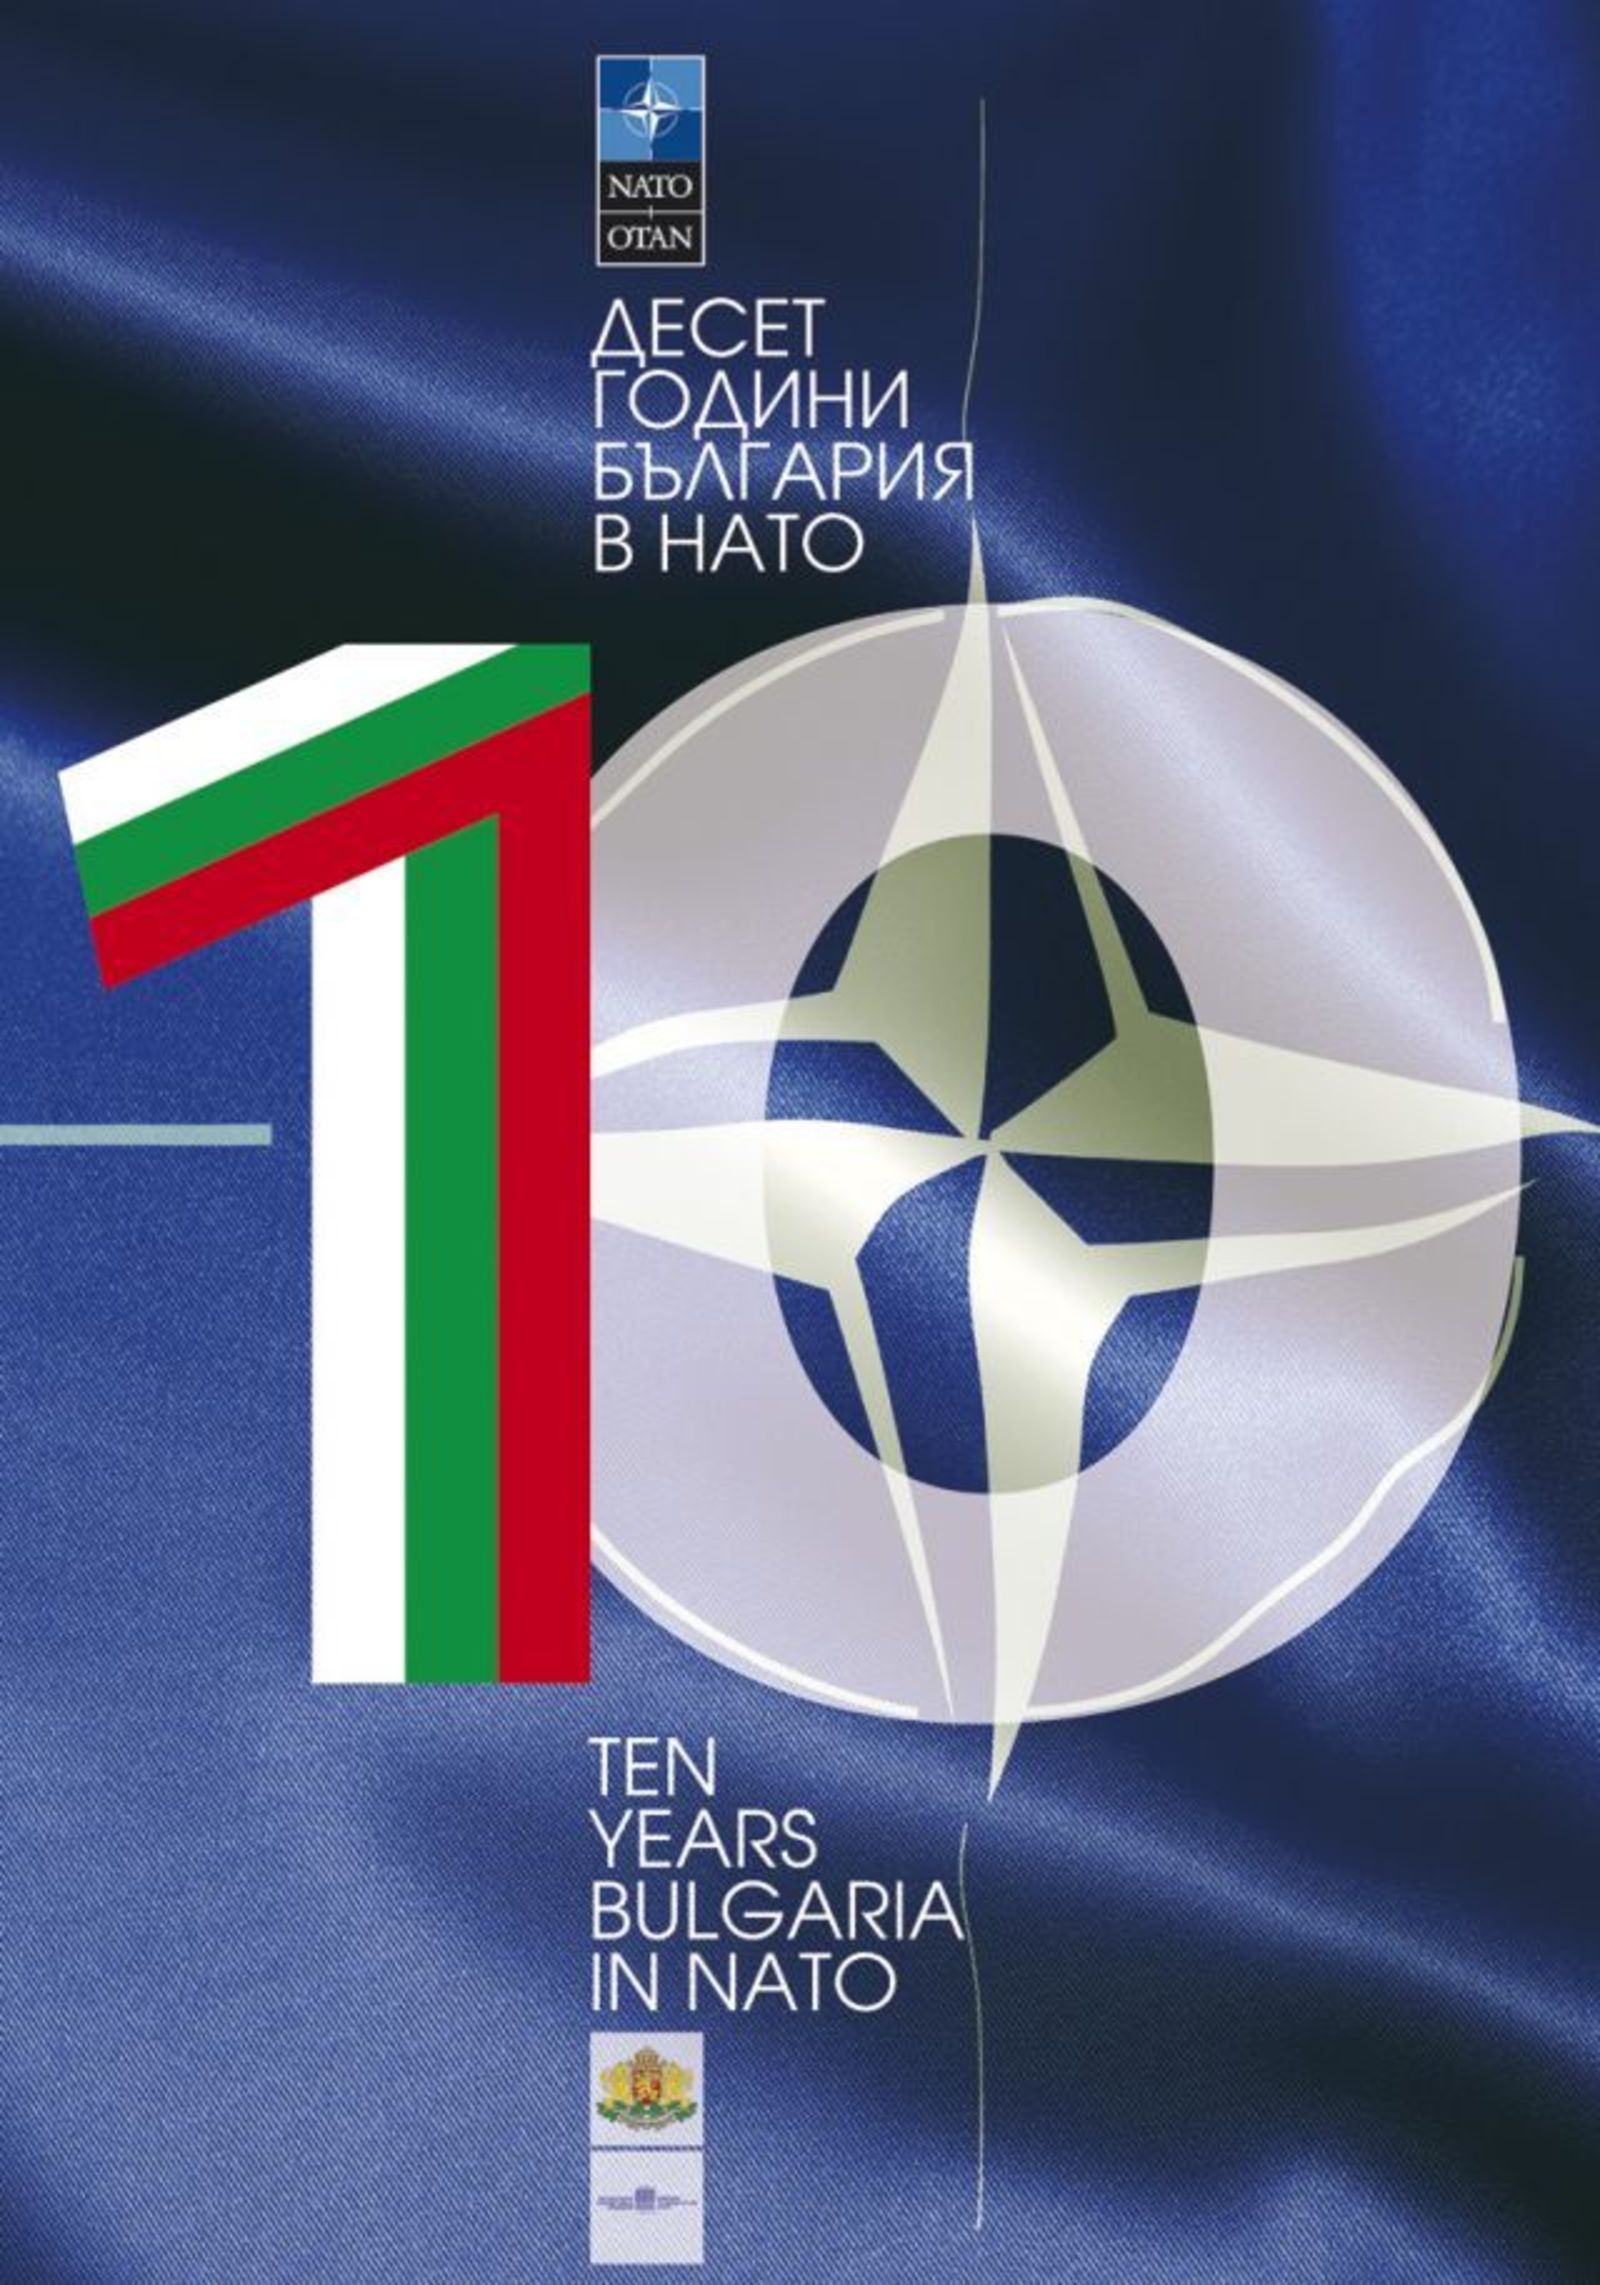 "10 years Bulgaria in NATO" - an exhibition of art posters - presented in Warsaw